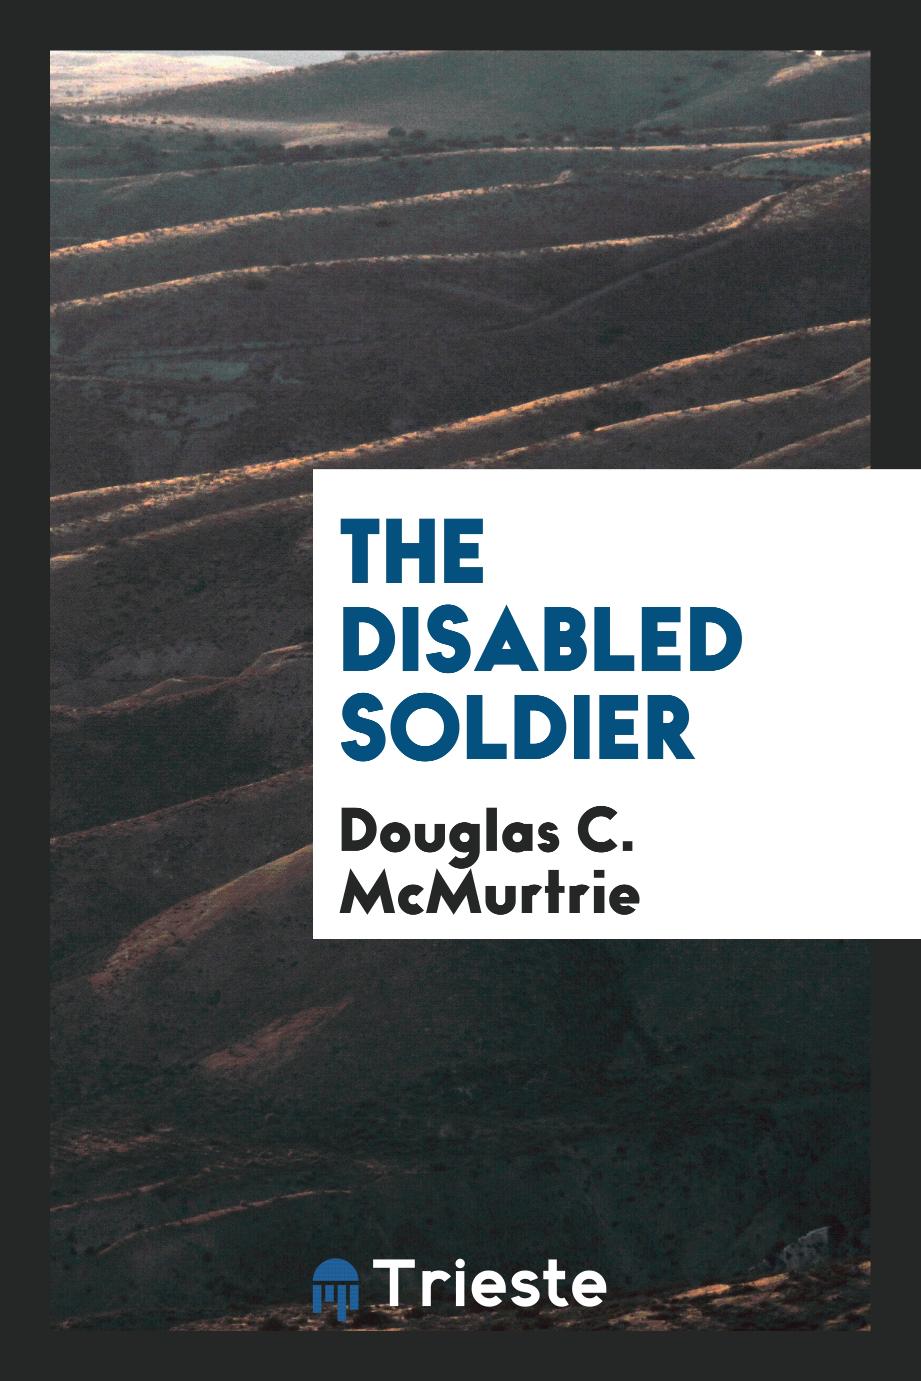 The disabled soldier